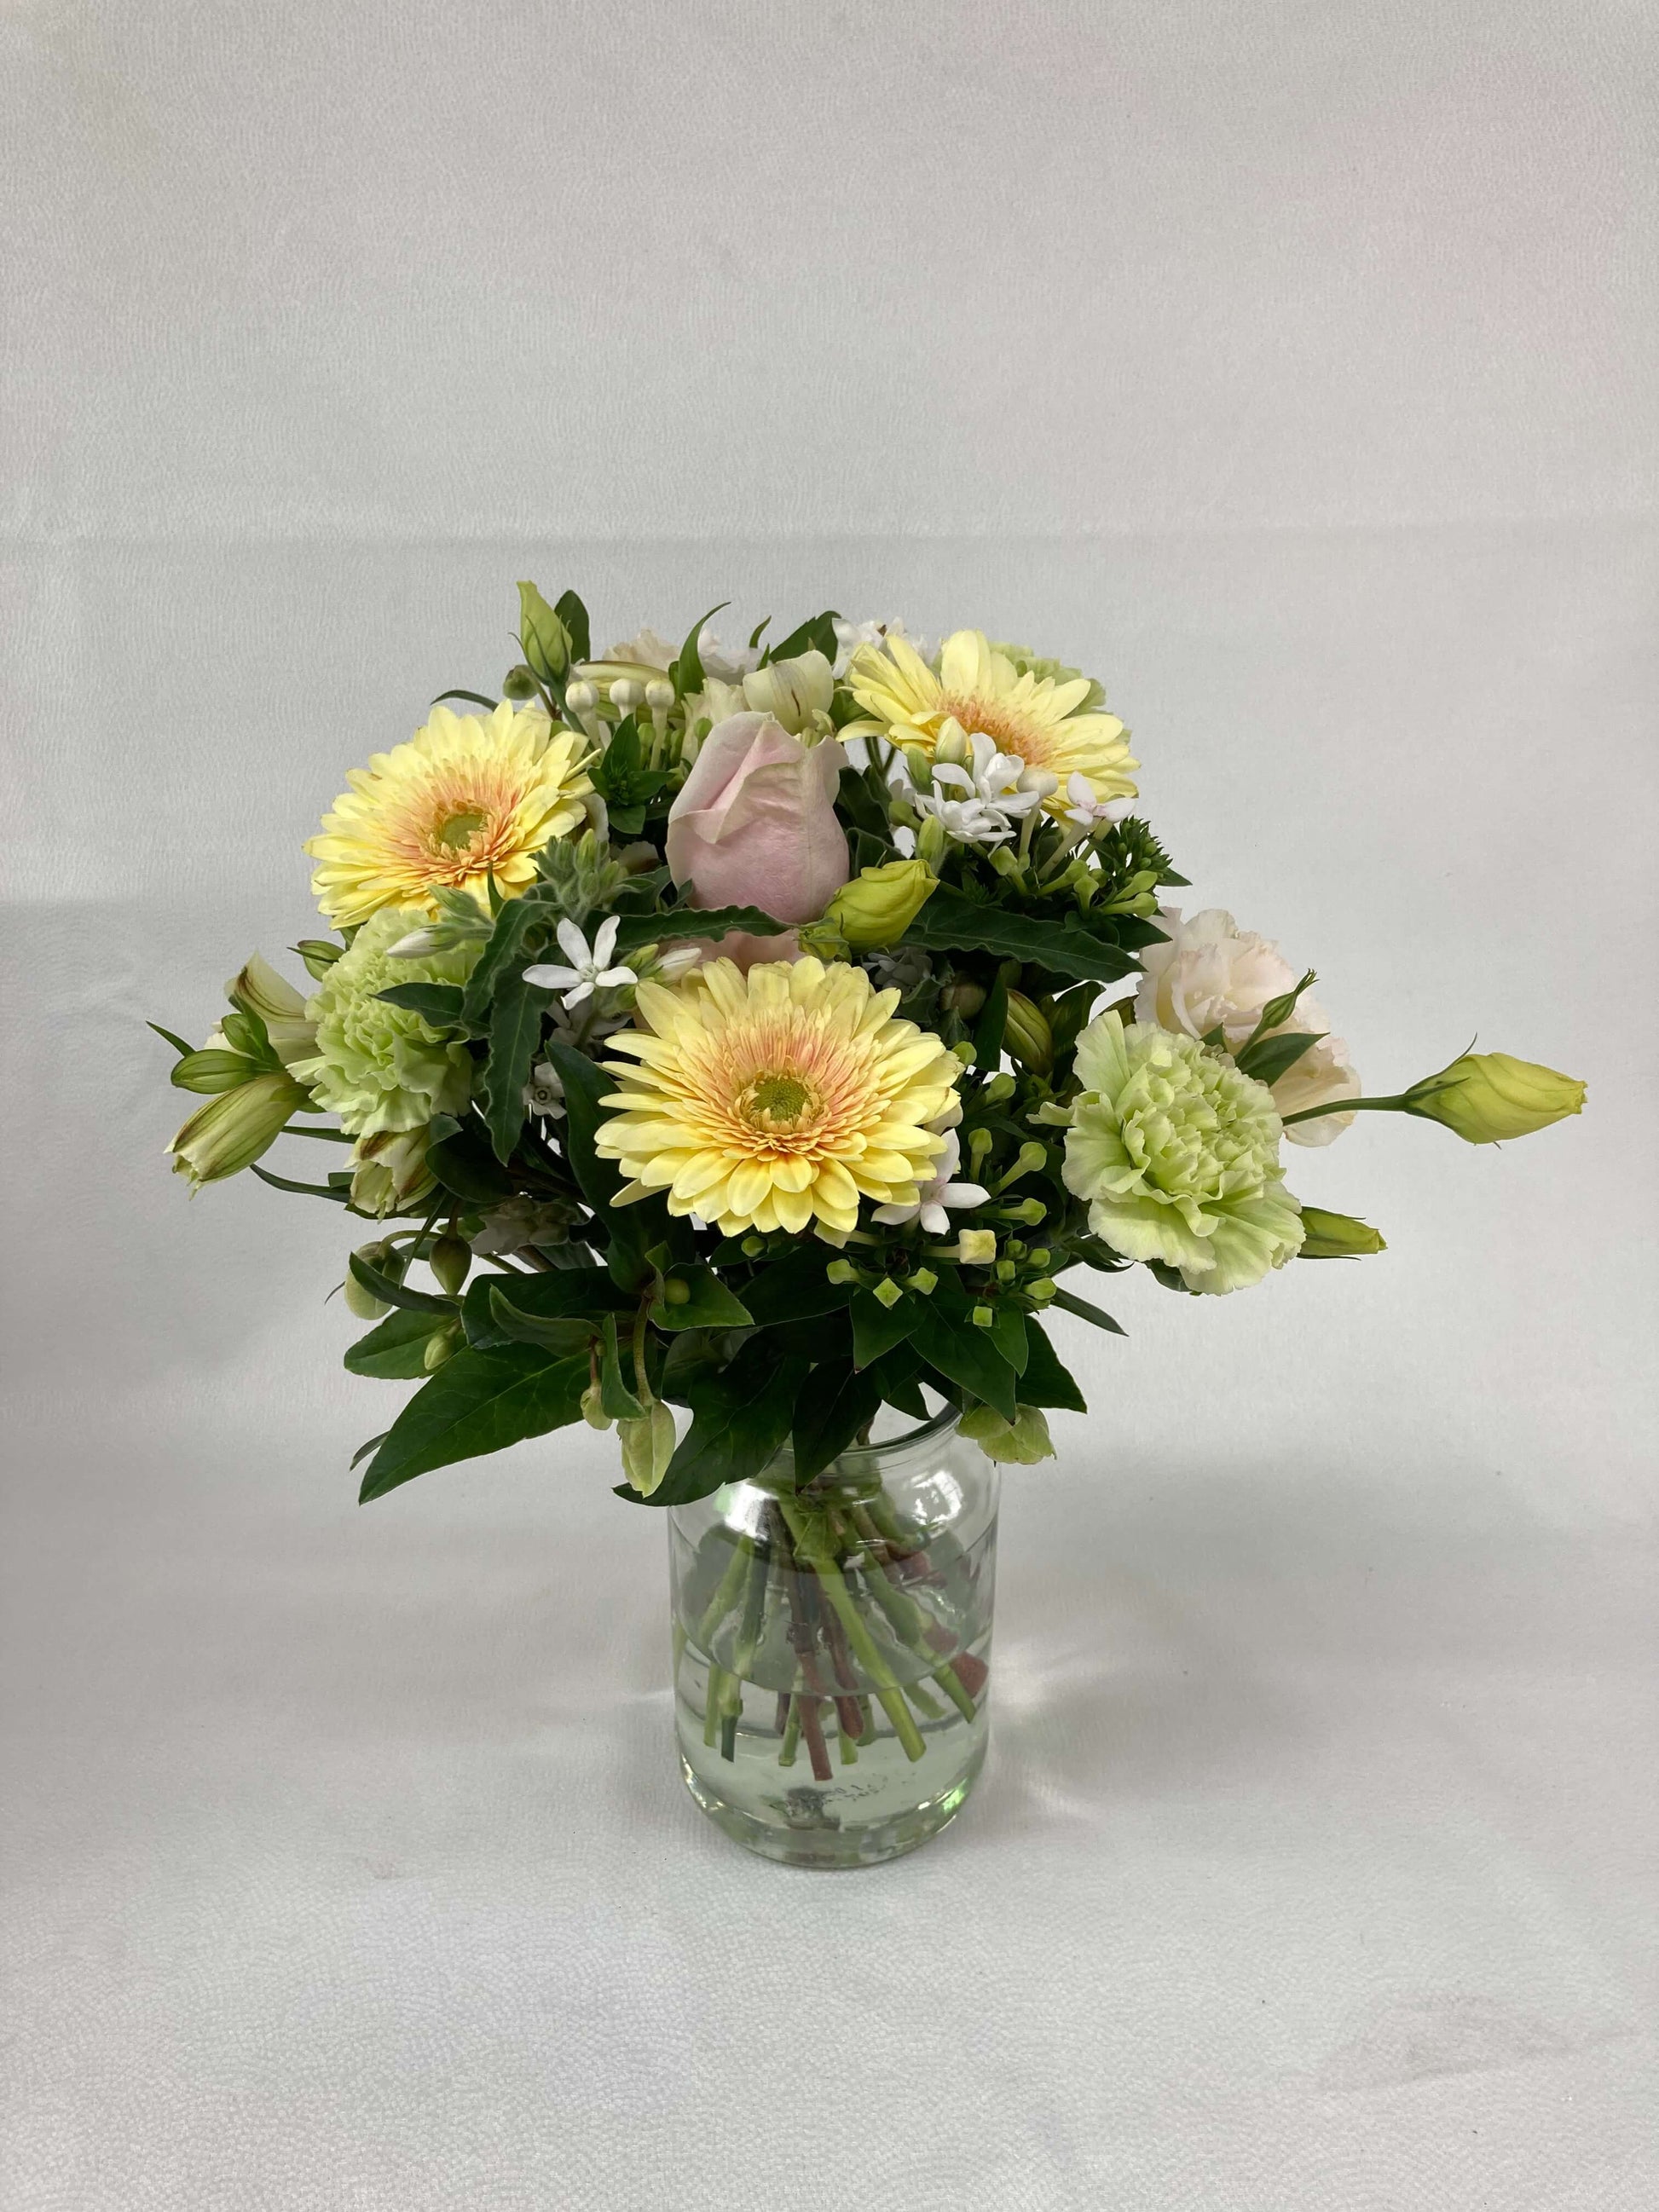 A pastel posy that you can receive in our posy subscription.